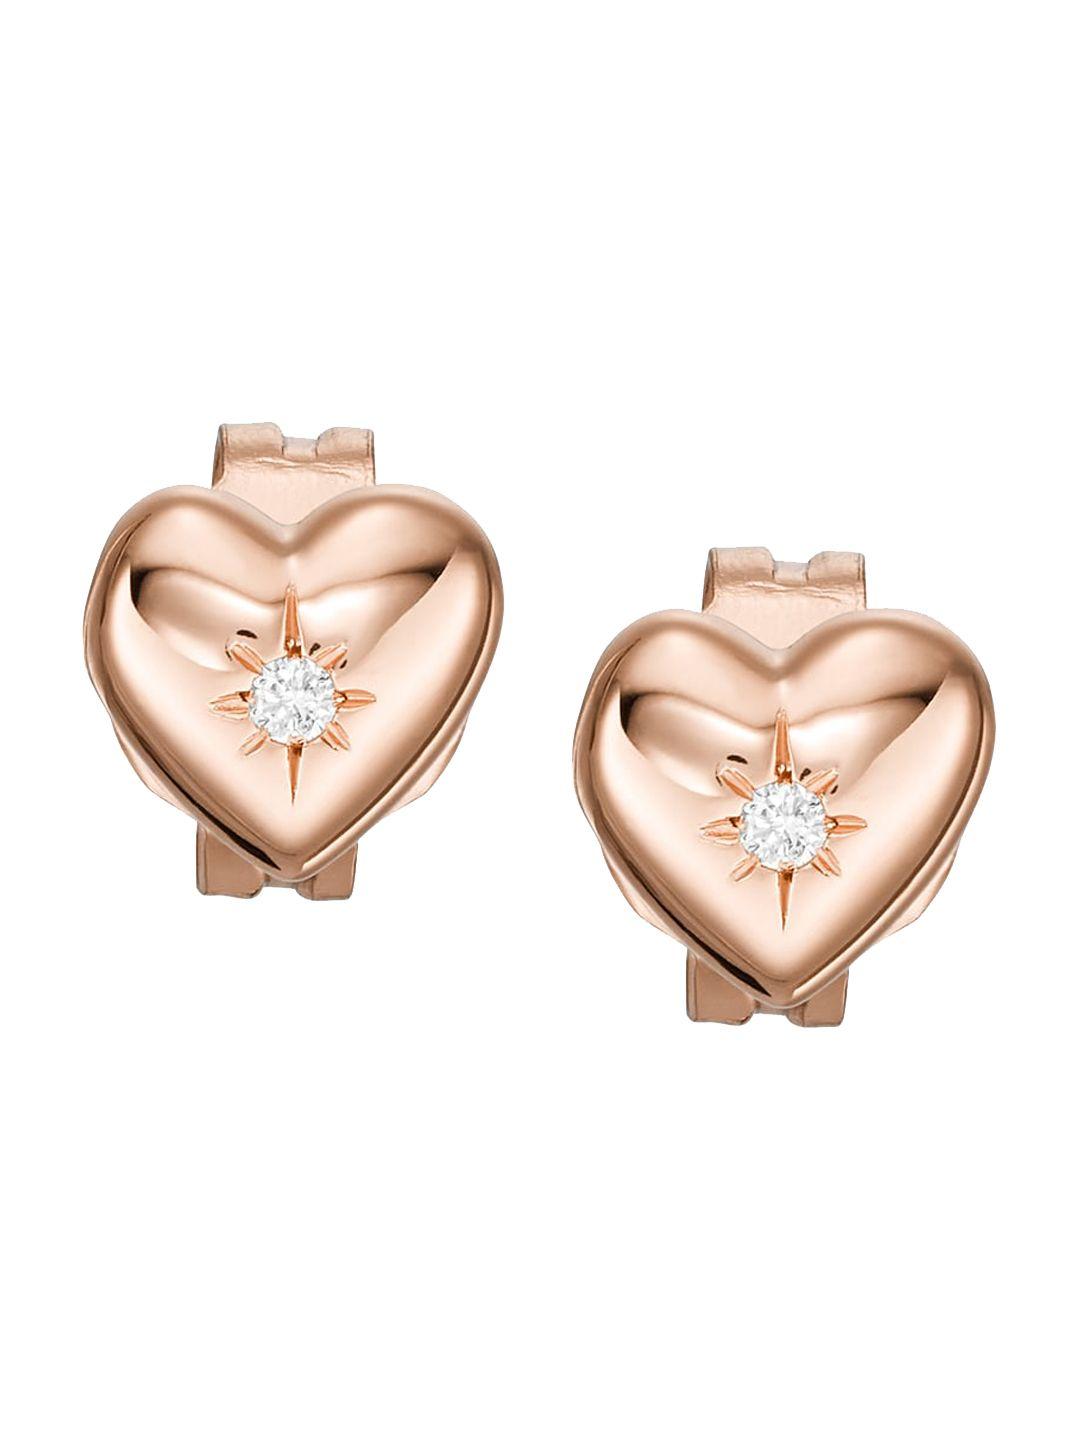 fossil rose gold-plated heart shaped studs earrings